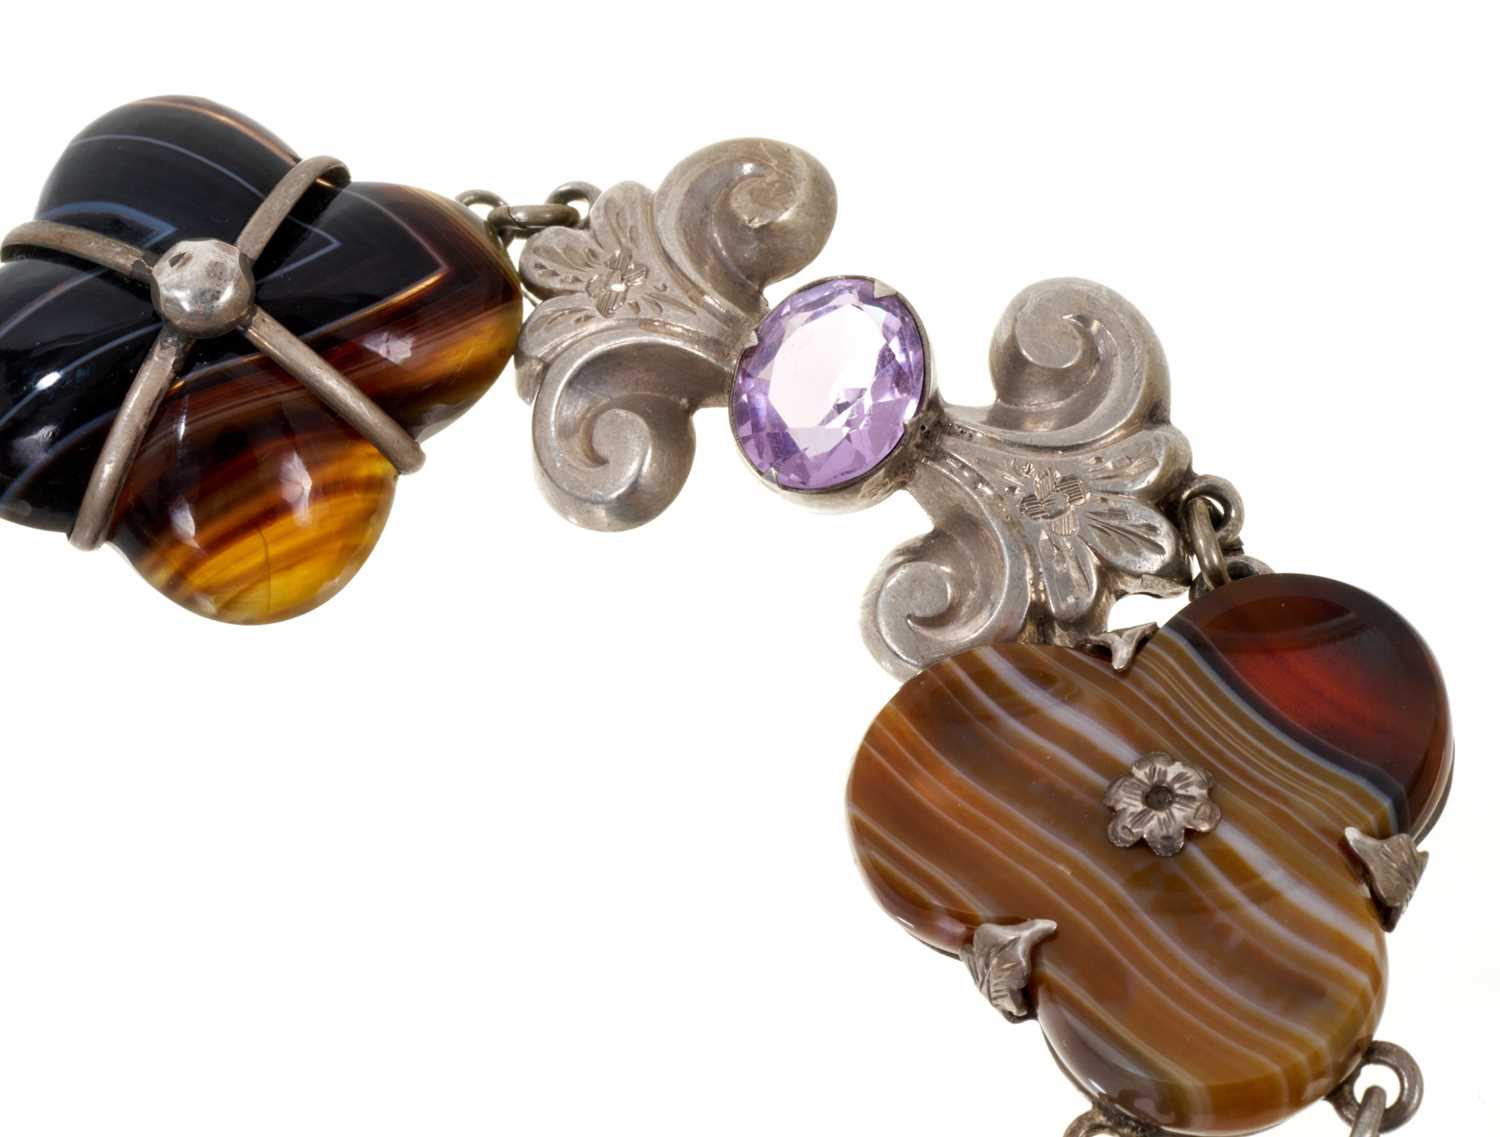 19th century Scottish hardstone, agate and gem set silver necklace, 41cm long - Image 2 of 4